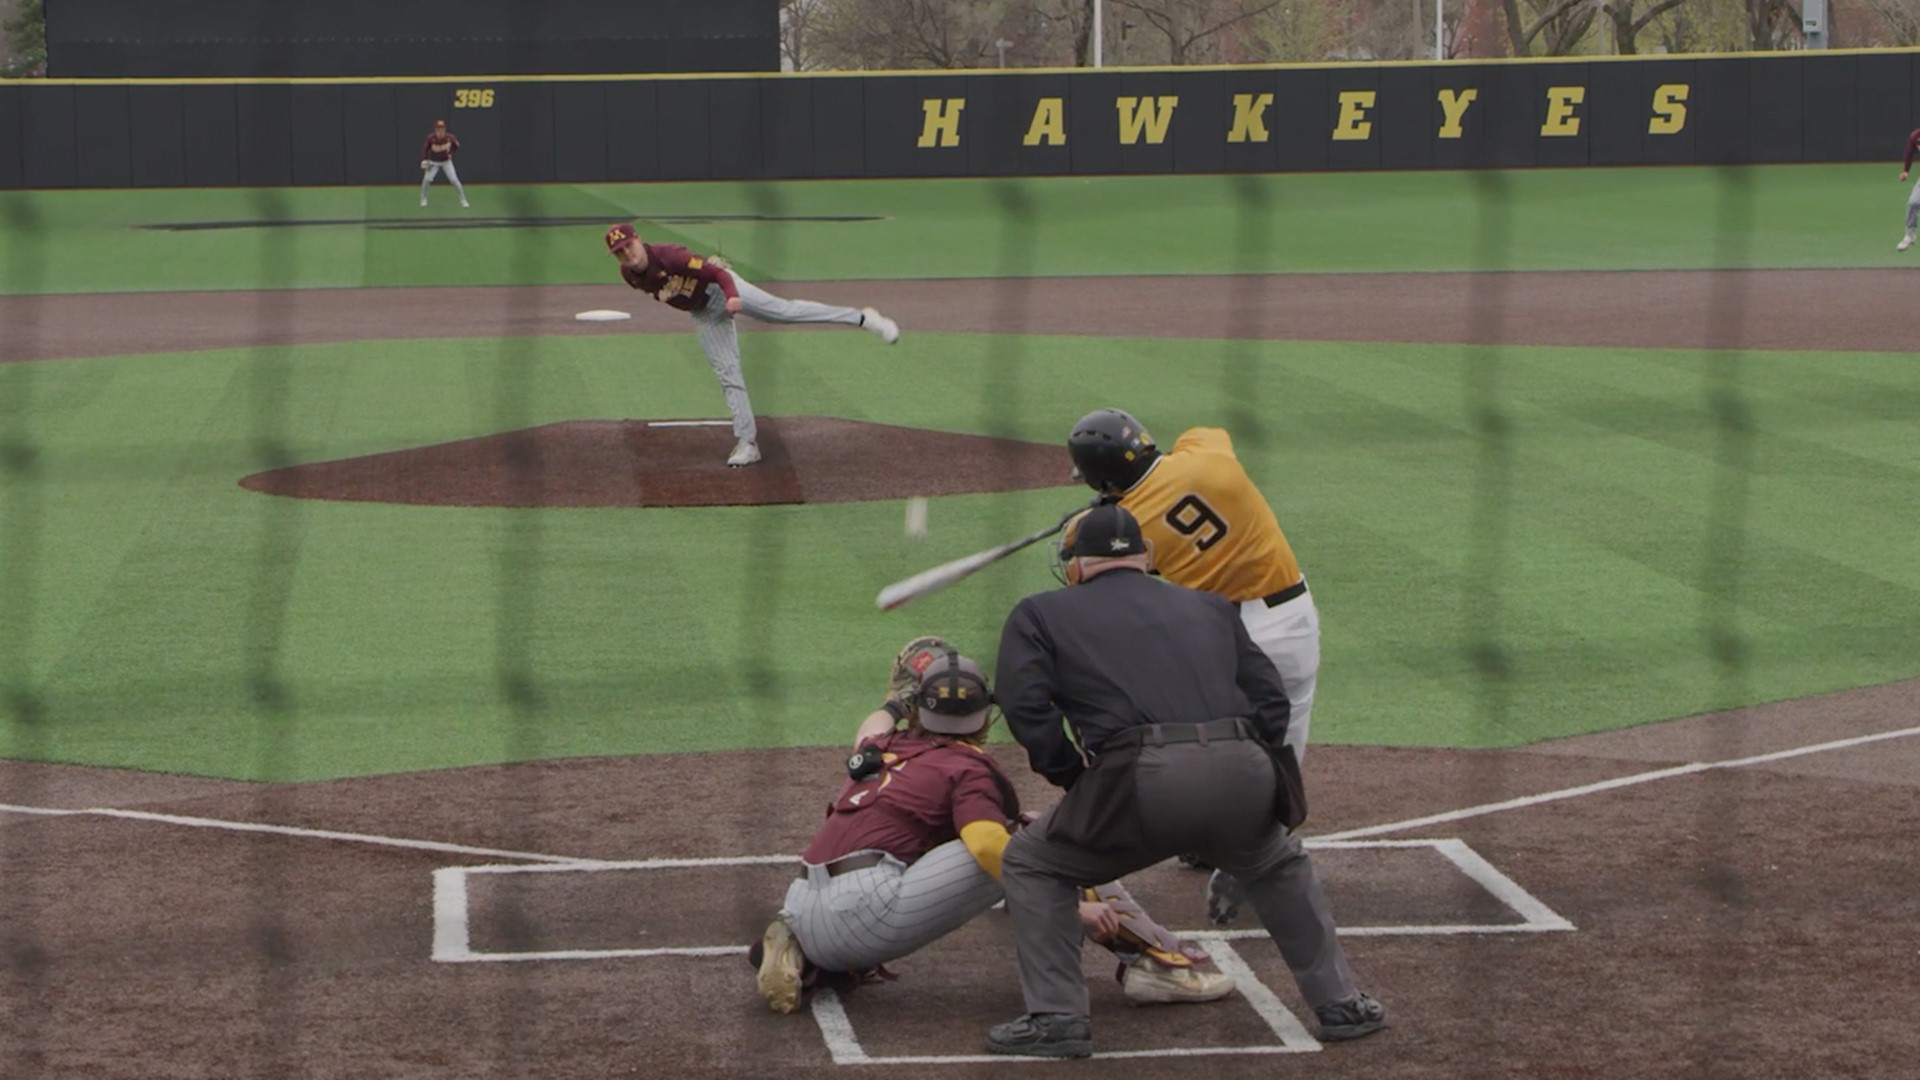 Iowa Baseball has won 11 of their last 13 after a slow start to their season. Ben Norman has had a big bat helping lead the Hawkeyes during this streak.